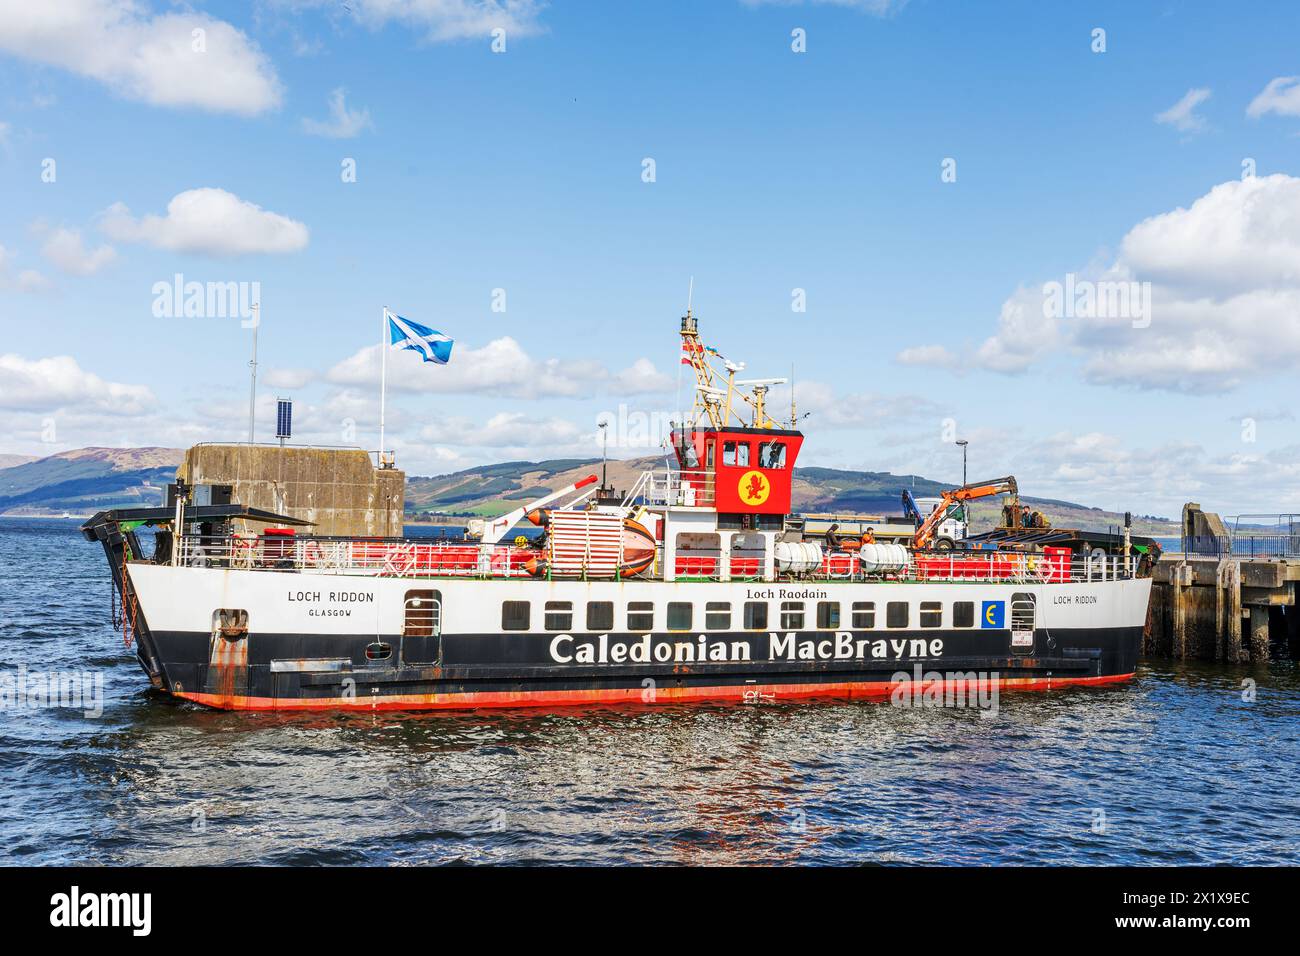 Caledonian MacBrayne MV Loch Riddon, Loch Raodain,  berthed at Rothesay pier, Isle of Bute, Firth of Clyde, Scotland, UK Stock Photo